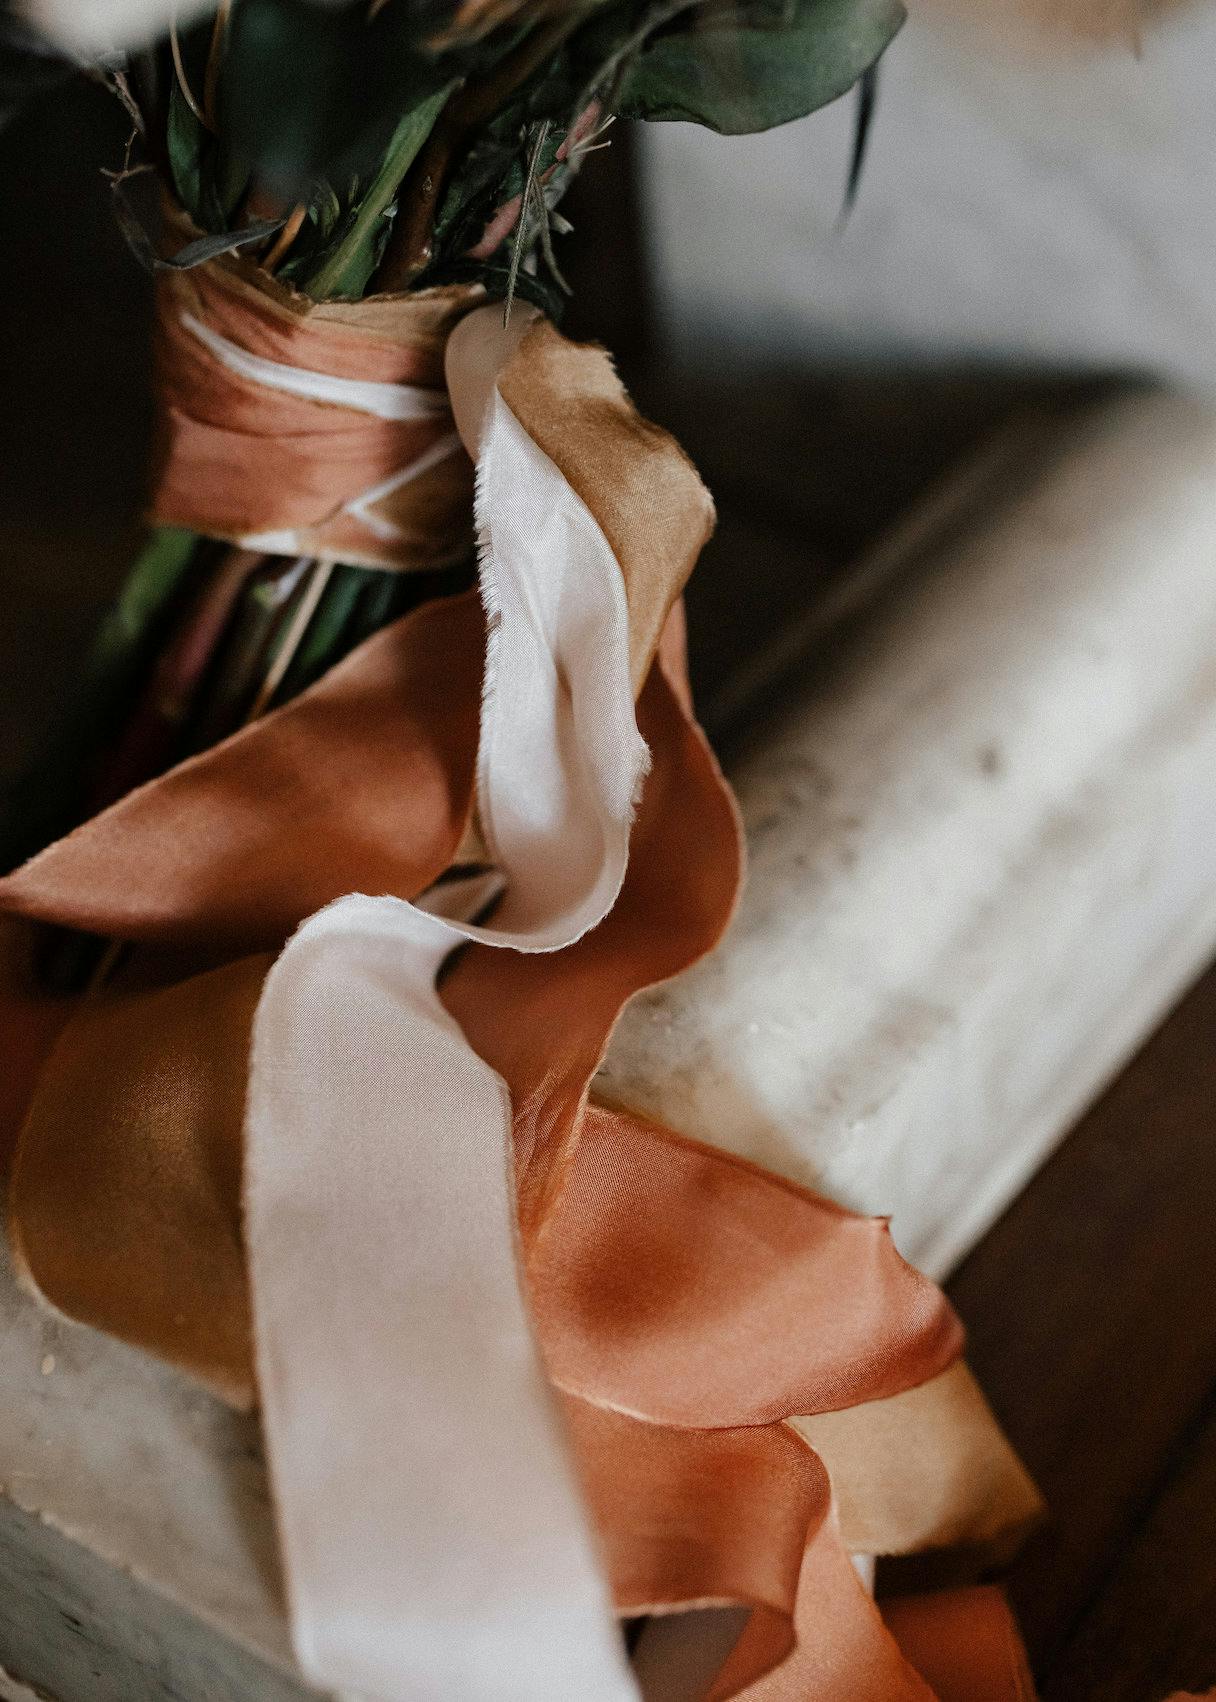 A close-up of a bouquet wrapped with orange, gold, and white ribbons. The ribbons are draped gracefully over a marble surface, creating a soft and elegant scene with natural textures and colors.